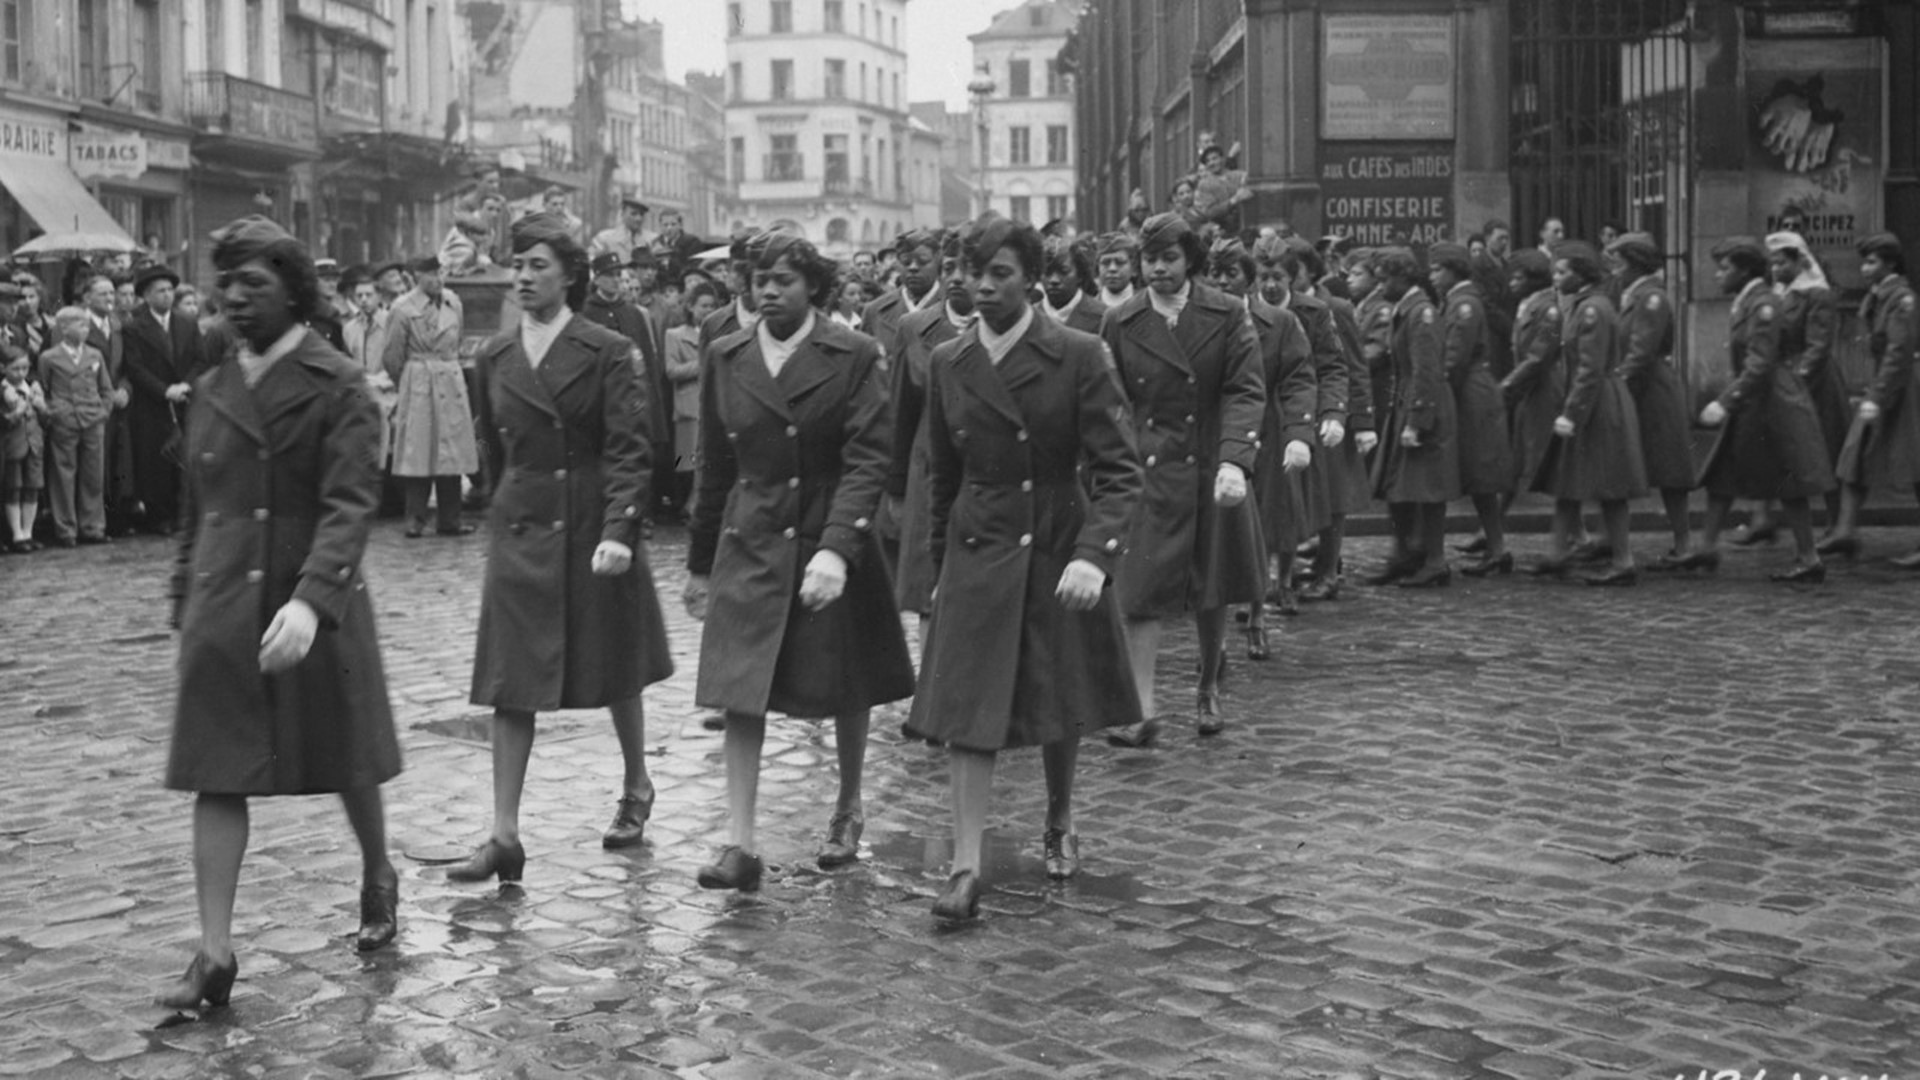 The 6888th during the Joan of Arc parade in Rouen (U.S. Army)